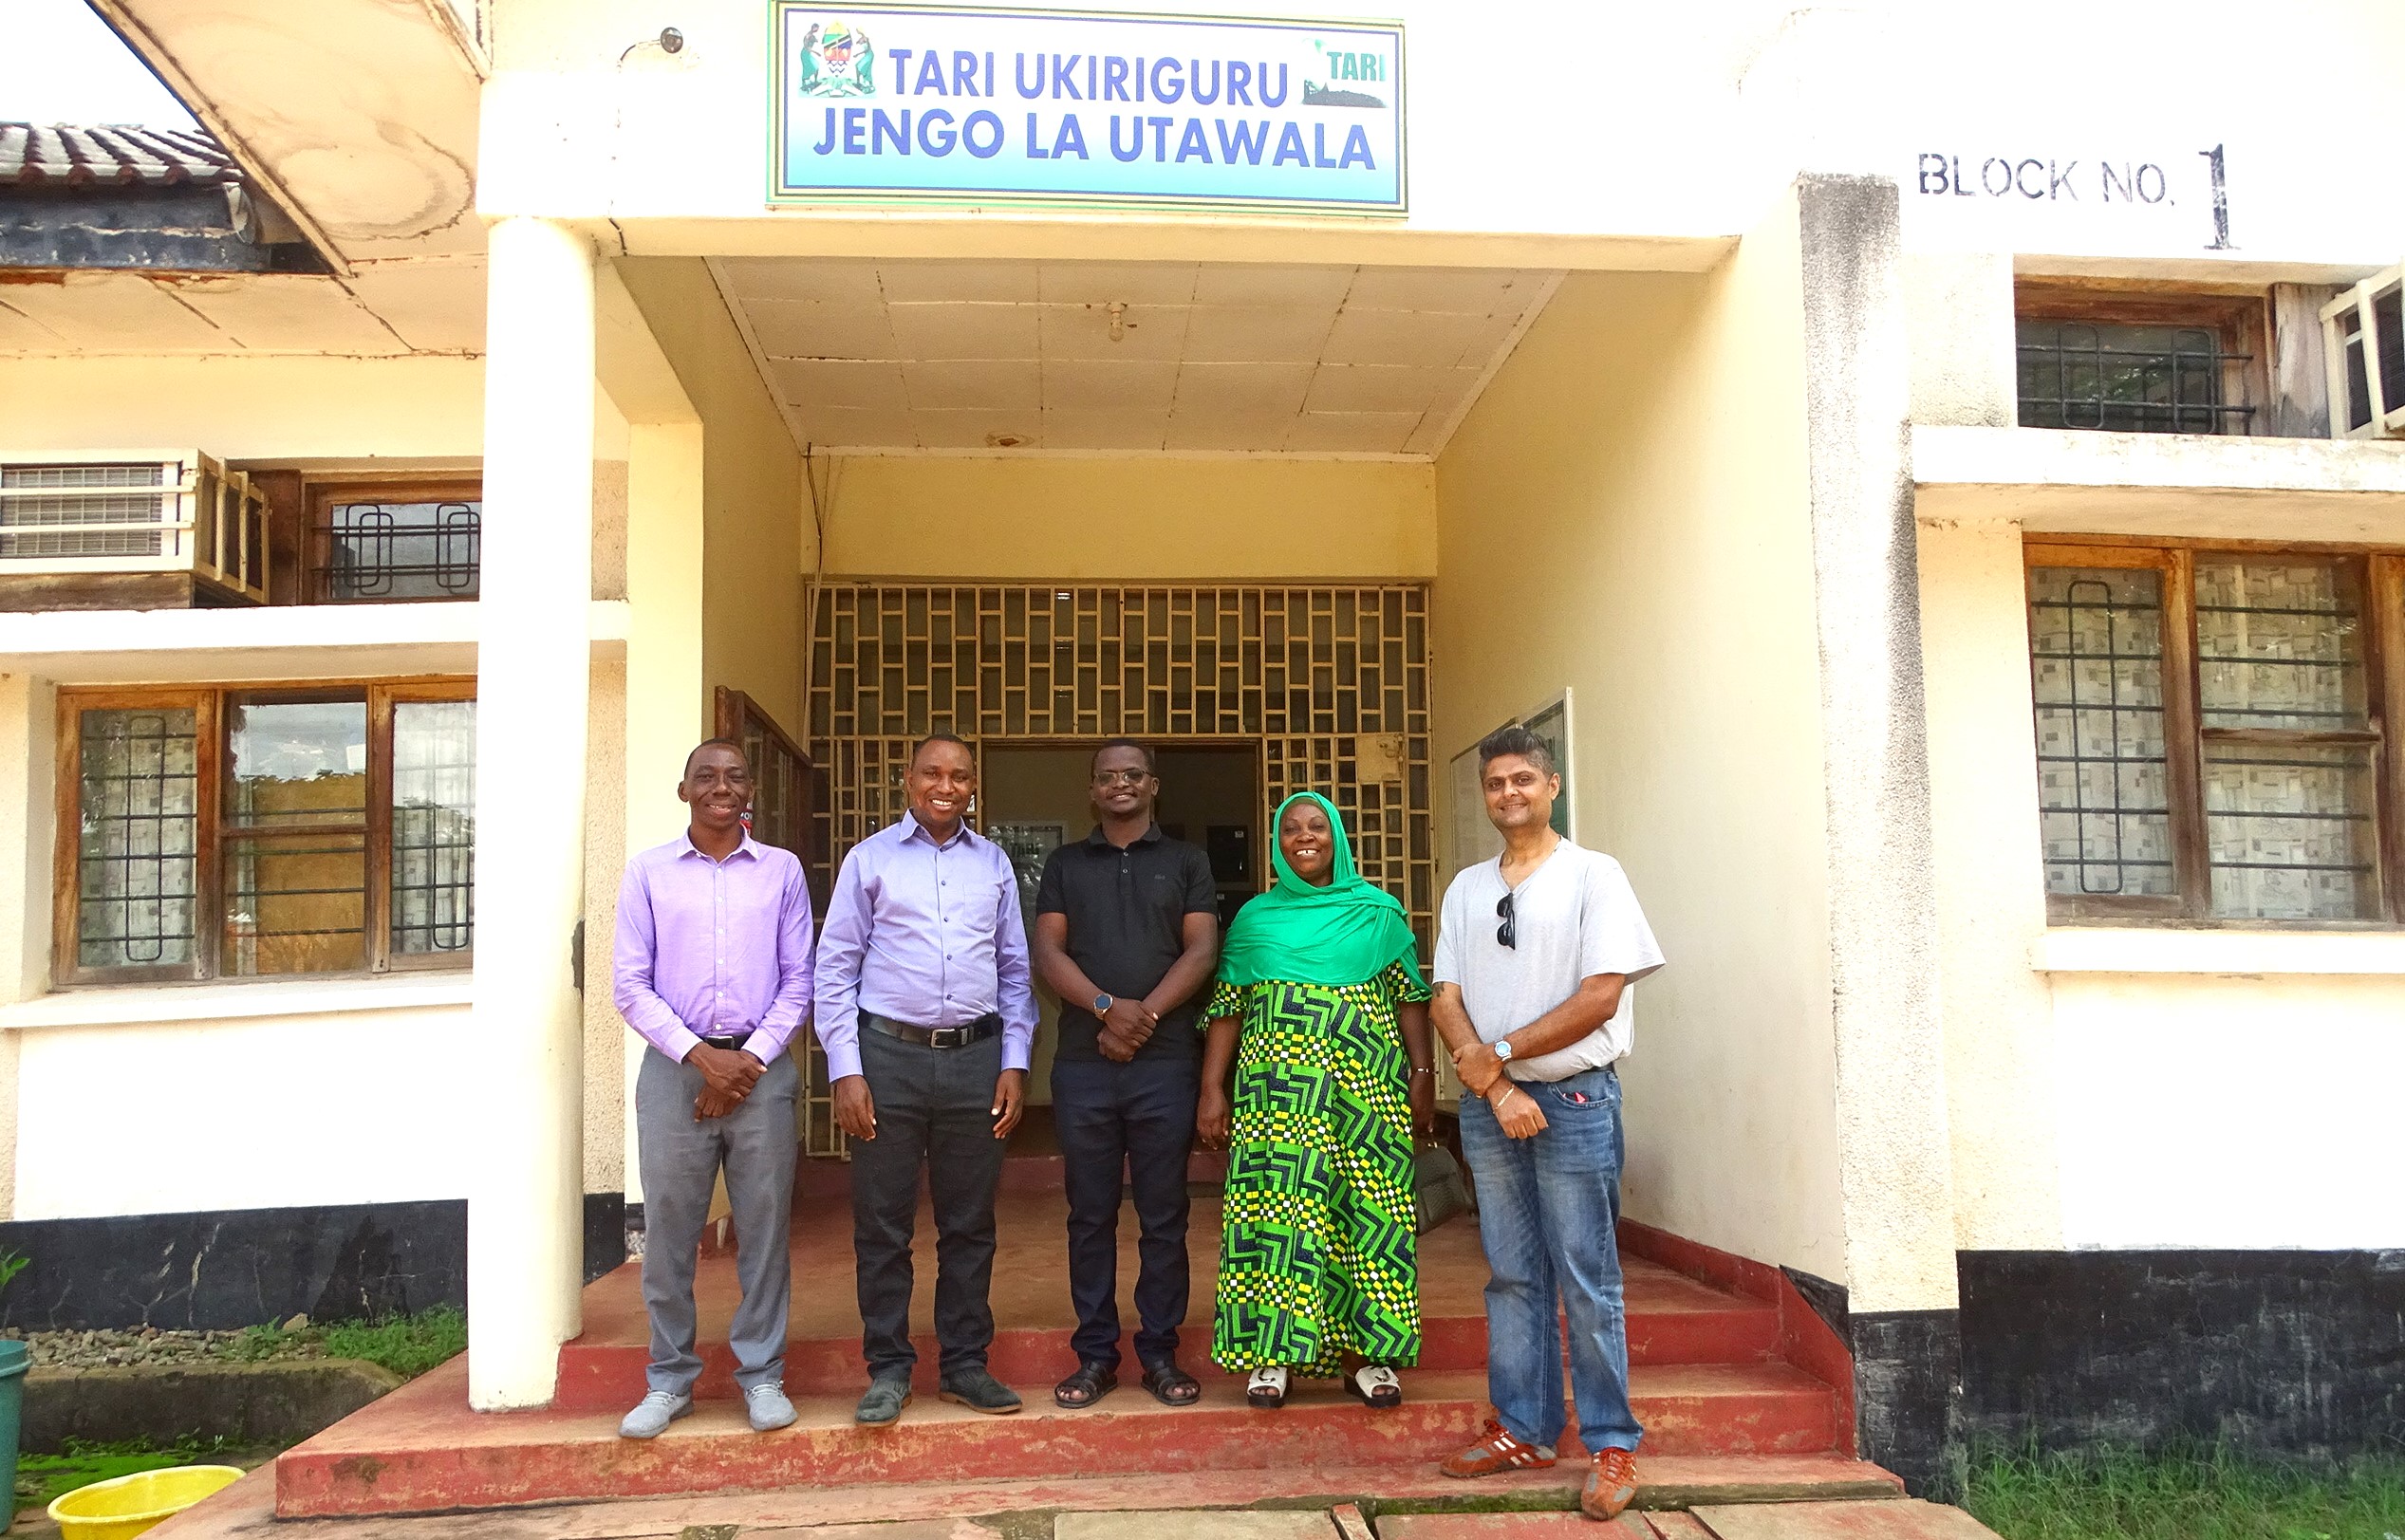 THE PARENTS COMMUNITY OF CHAMA CHA MAPINDUZI(CCM) -MWANZA REGION TO COLLABORATE WITH TARI  IN RESEARCH ACTIVITIES.